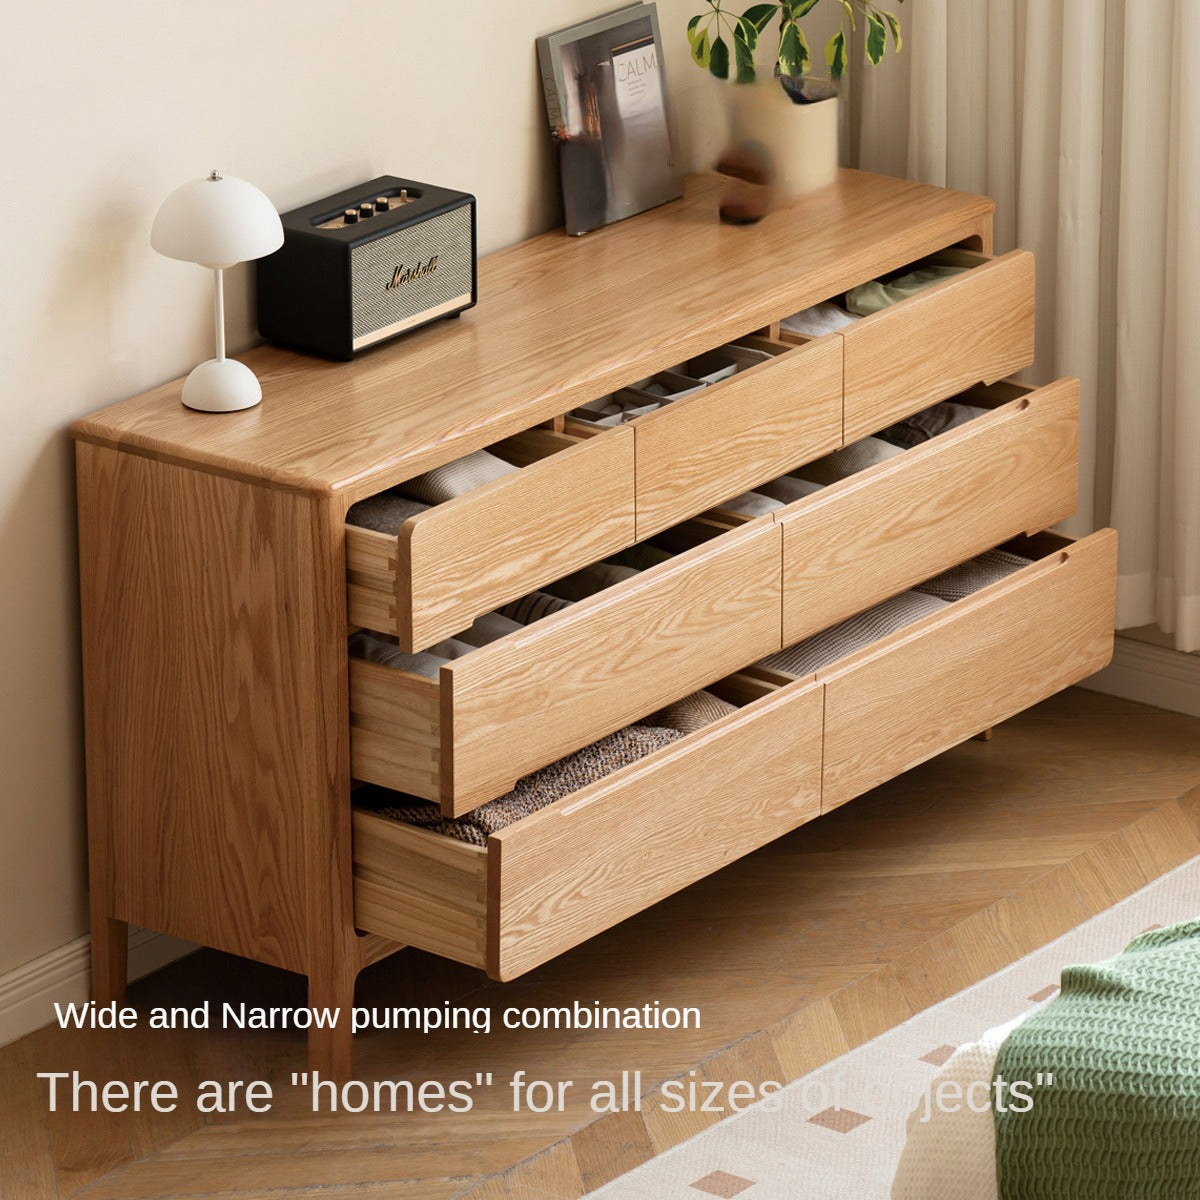 Oak Solid Wood Seattle wide chest of drawers)